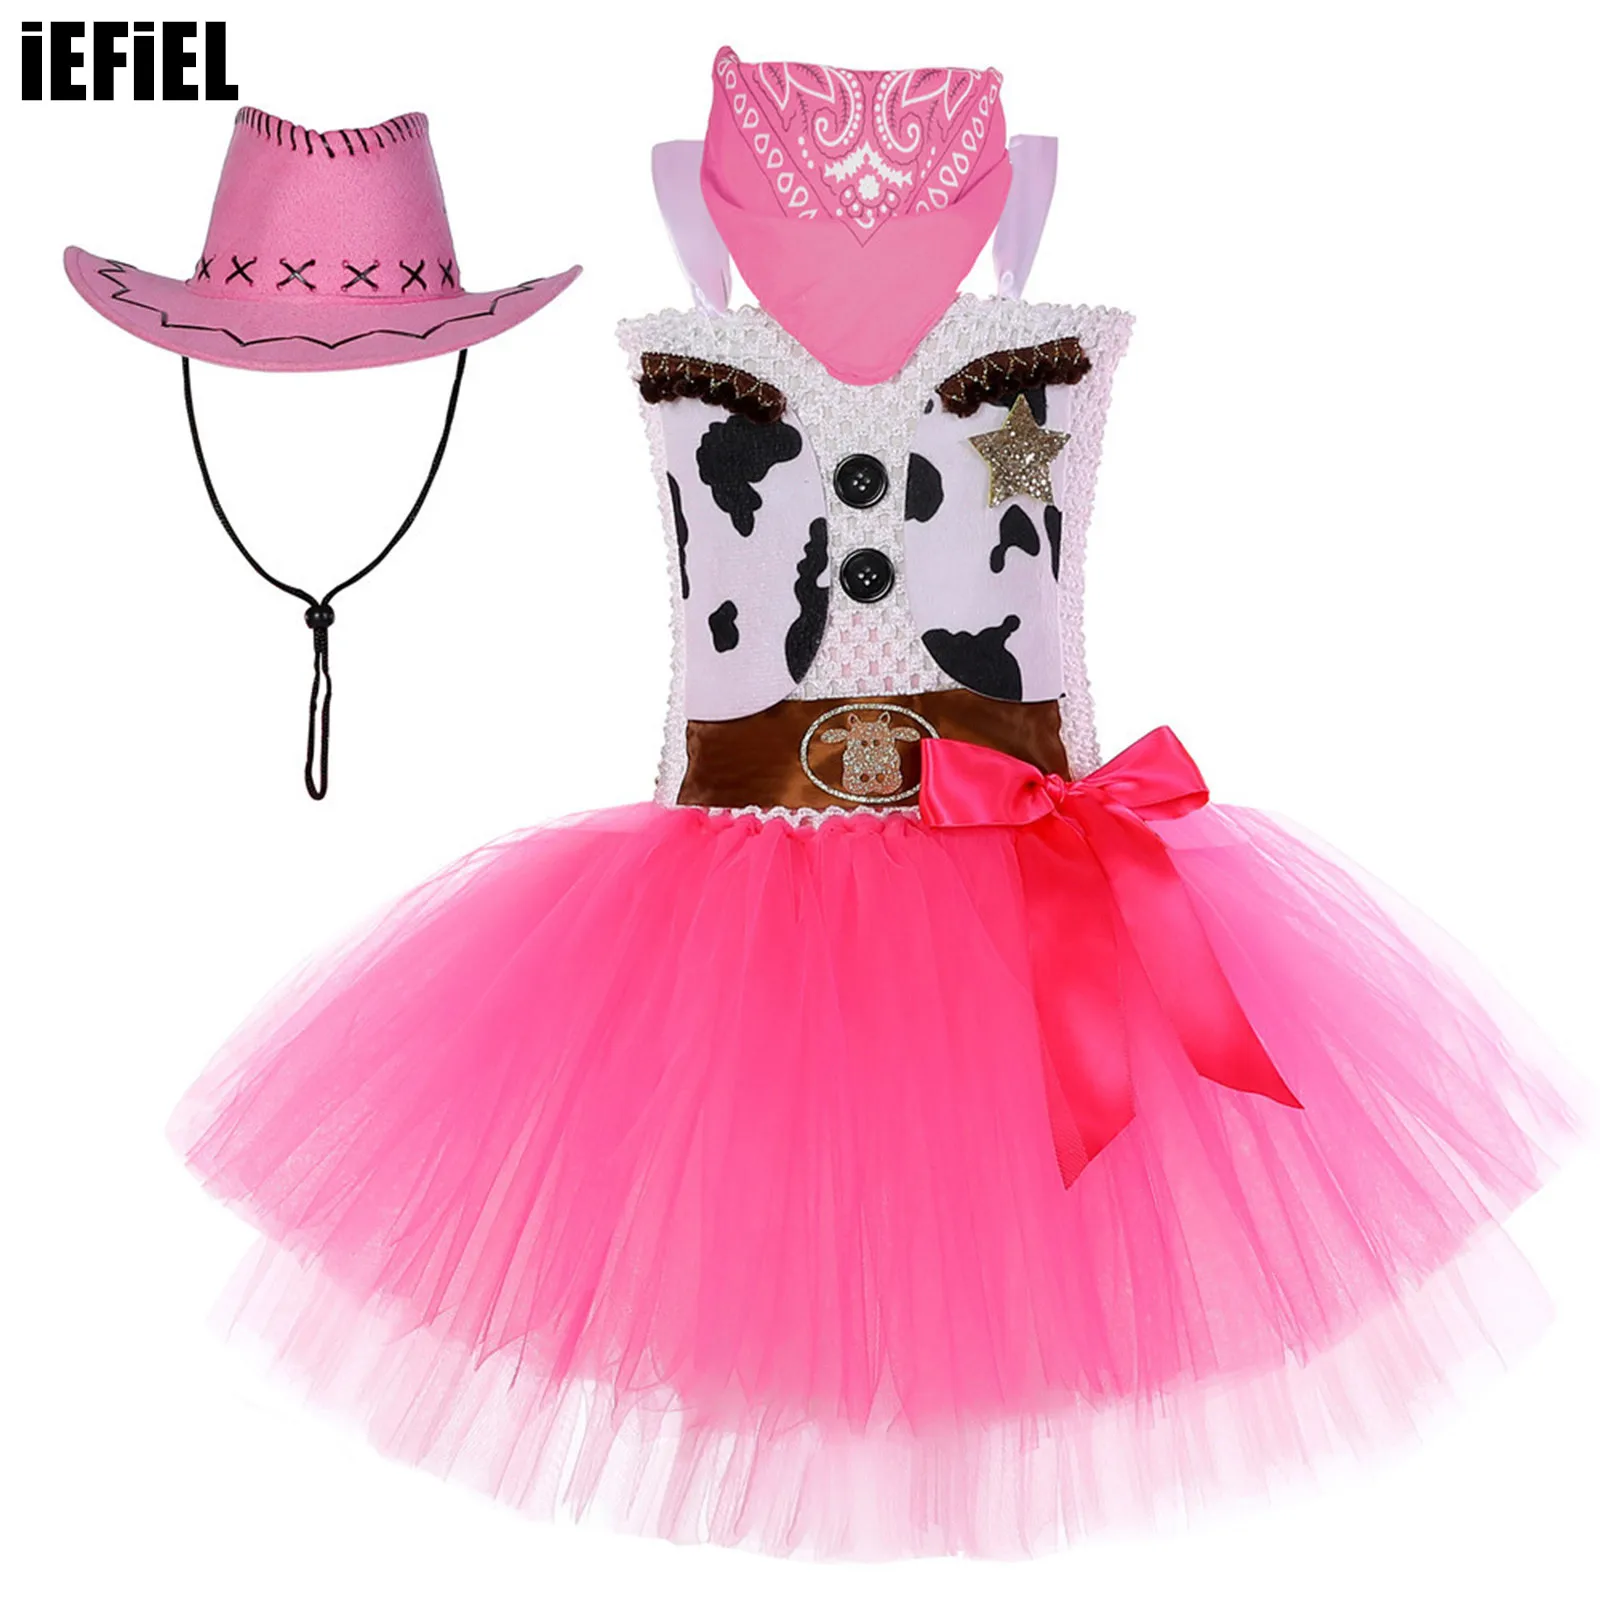 

Kids Girls Halloween Cowgirl Costume Outfit Straps Sleeveless Cow Print Tutu Dress with Felt Drawstring Hat Set for Performance